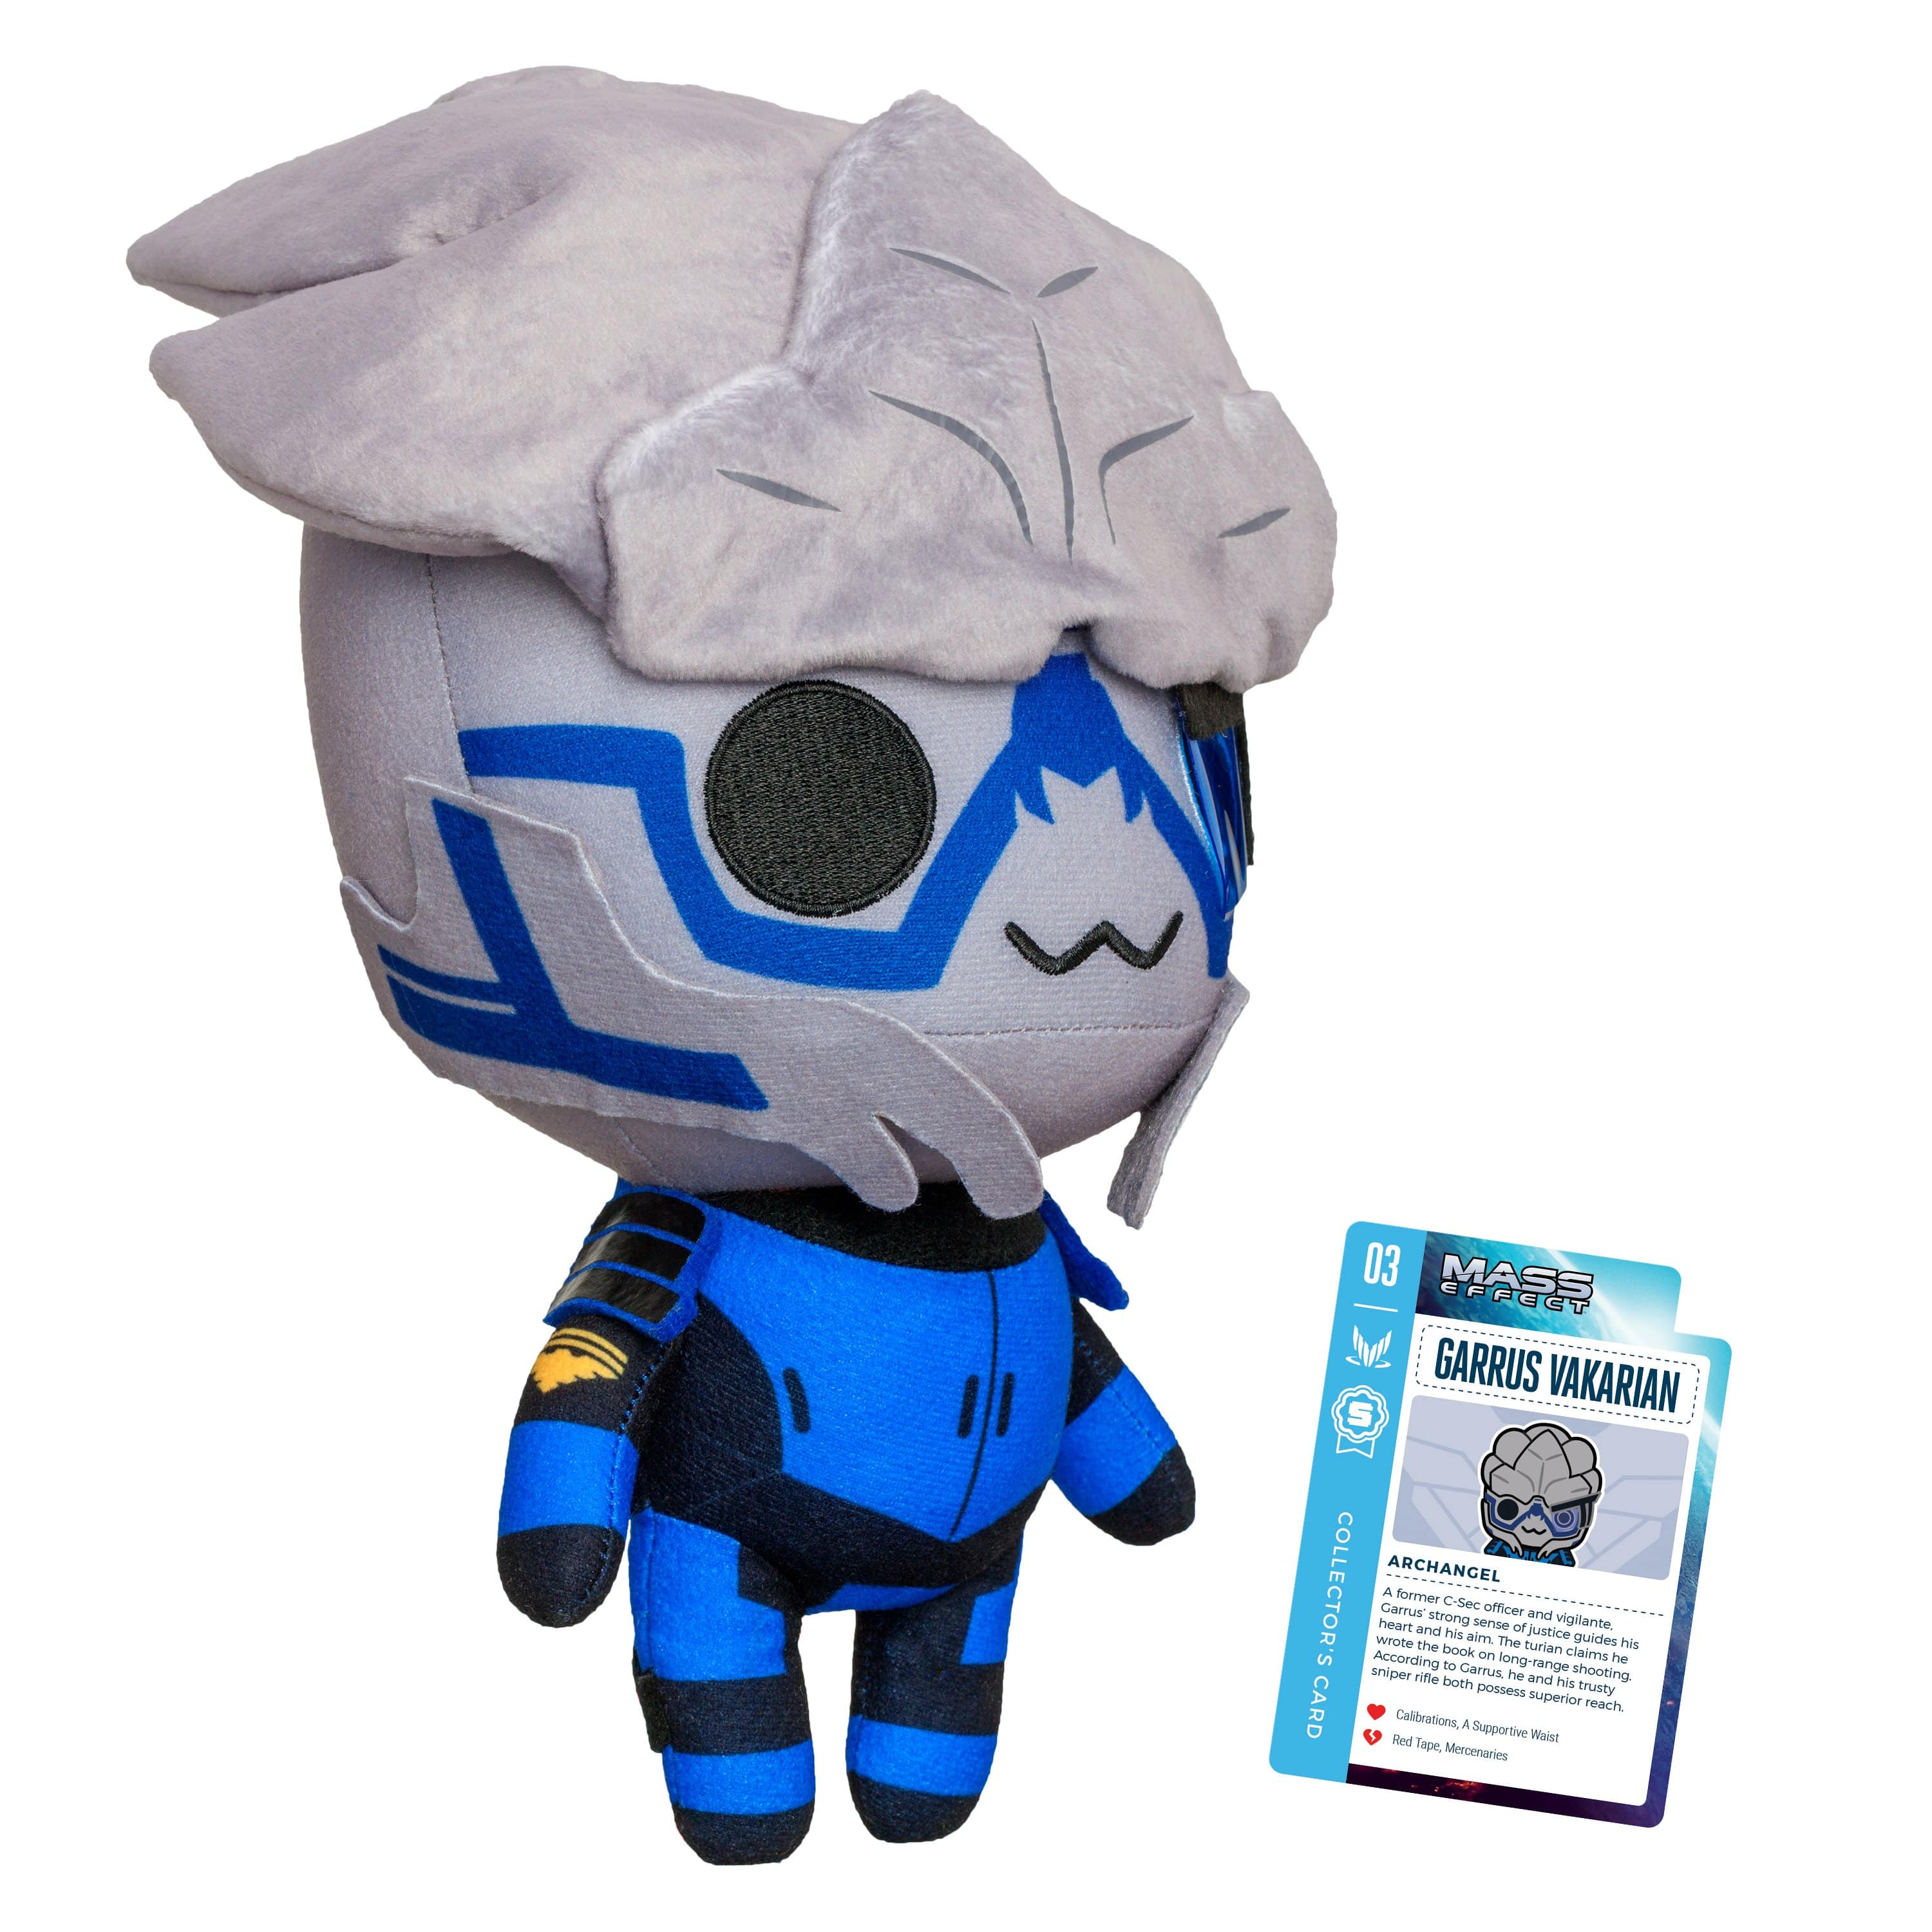 Mass Effect - 11" Garrus Collector's Stuffed Plush Toy Side View With Collector's Card